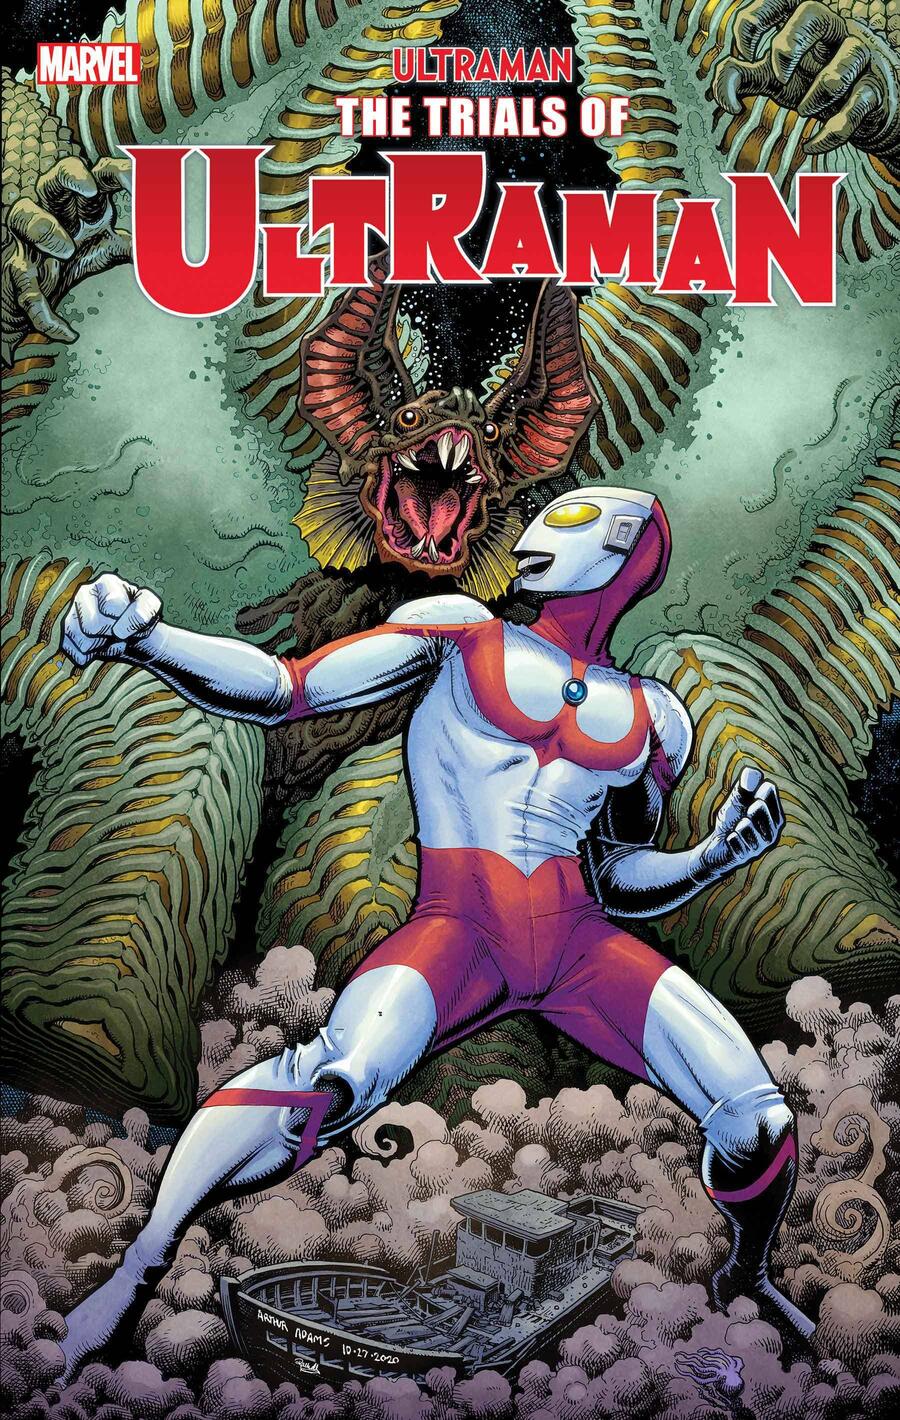 Hell Yeah, Ultraman’s Comics Adventures Will Continue in The Trials of Ultraman